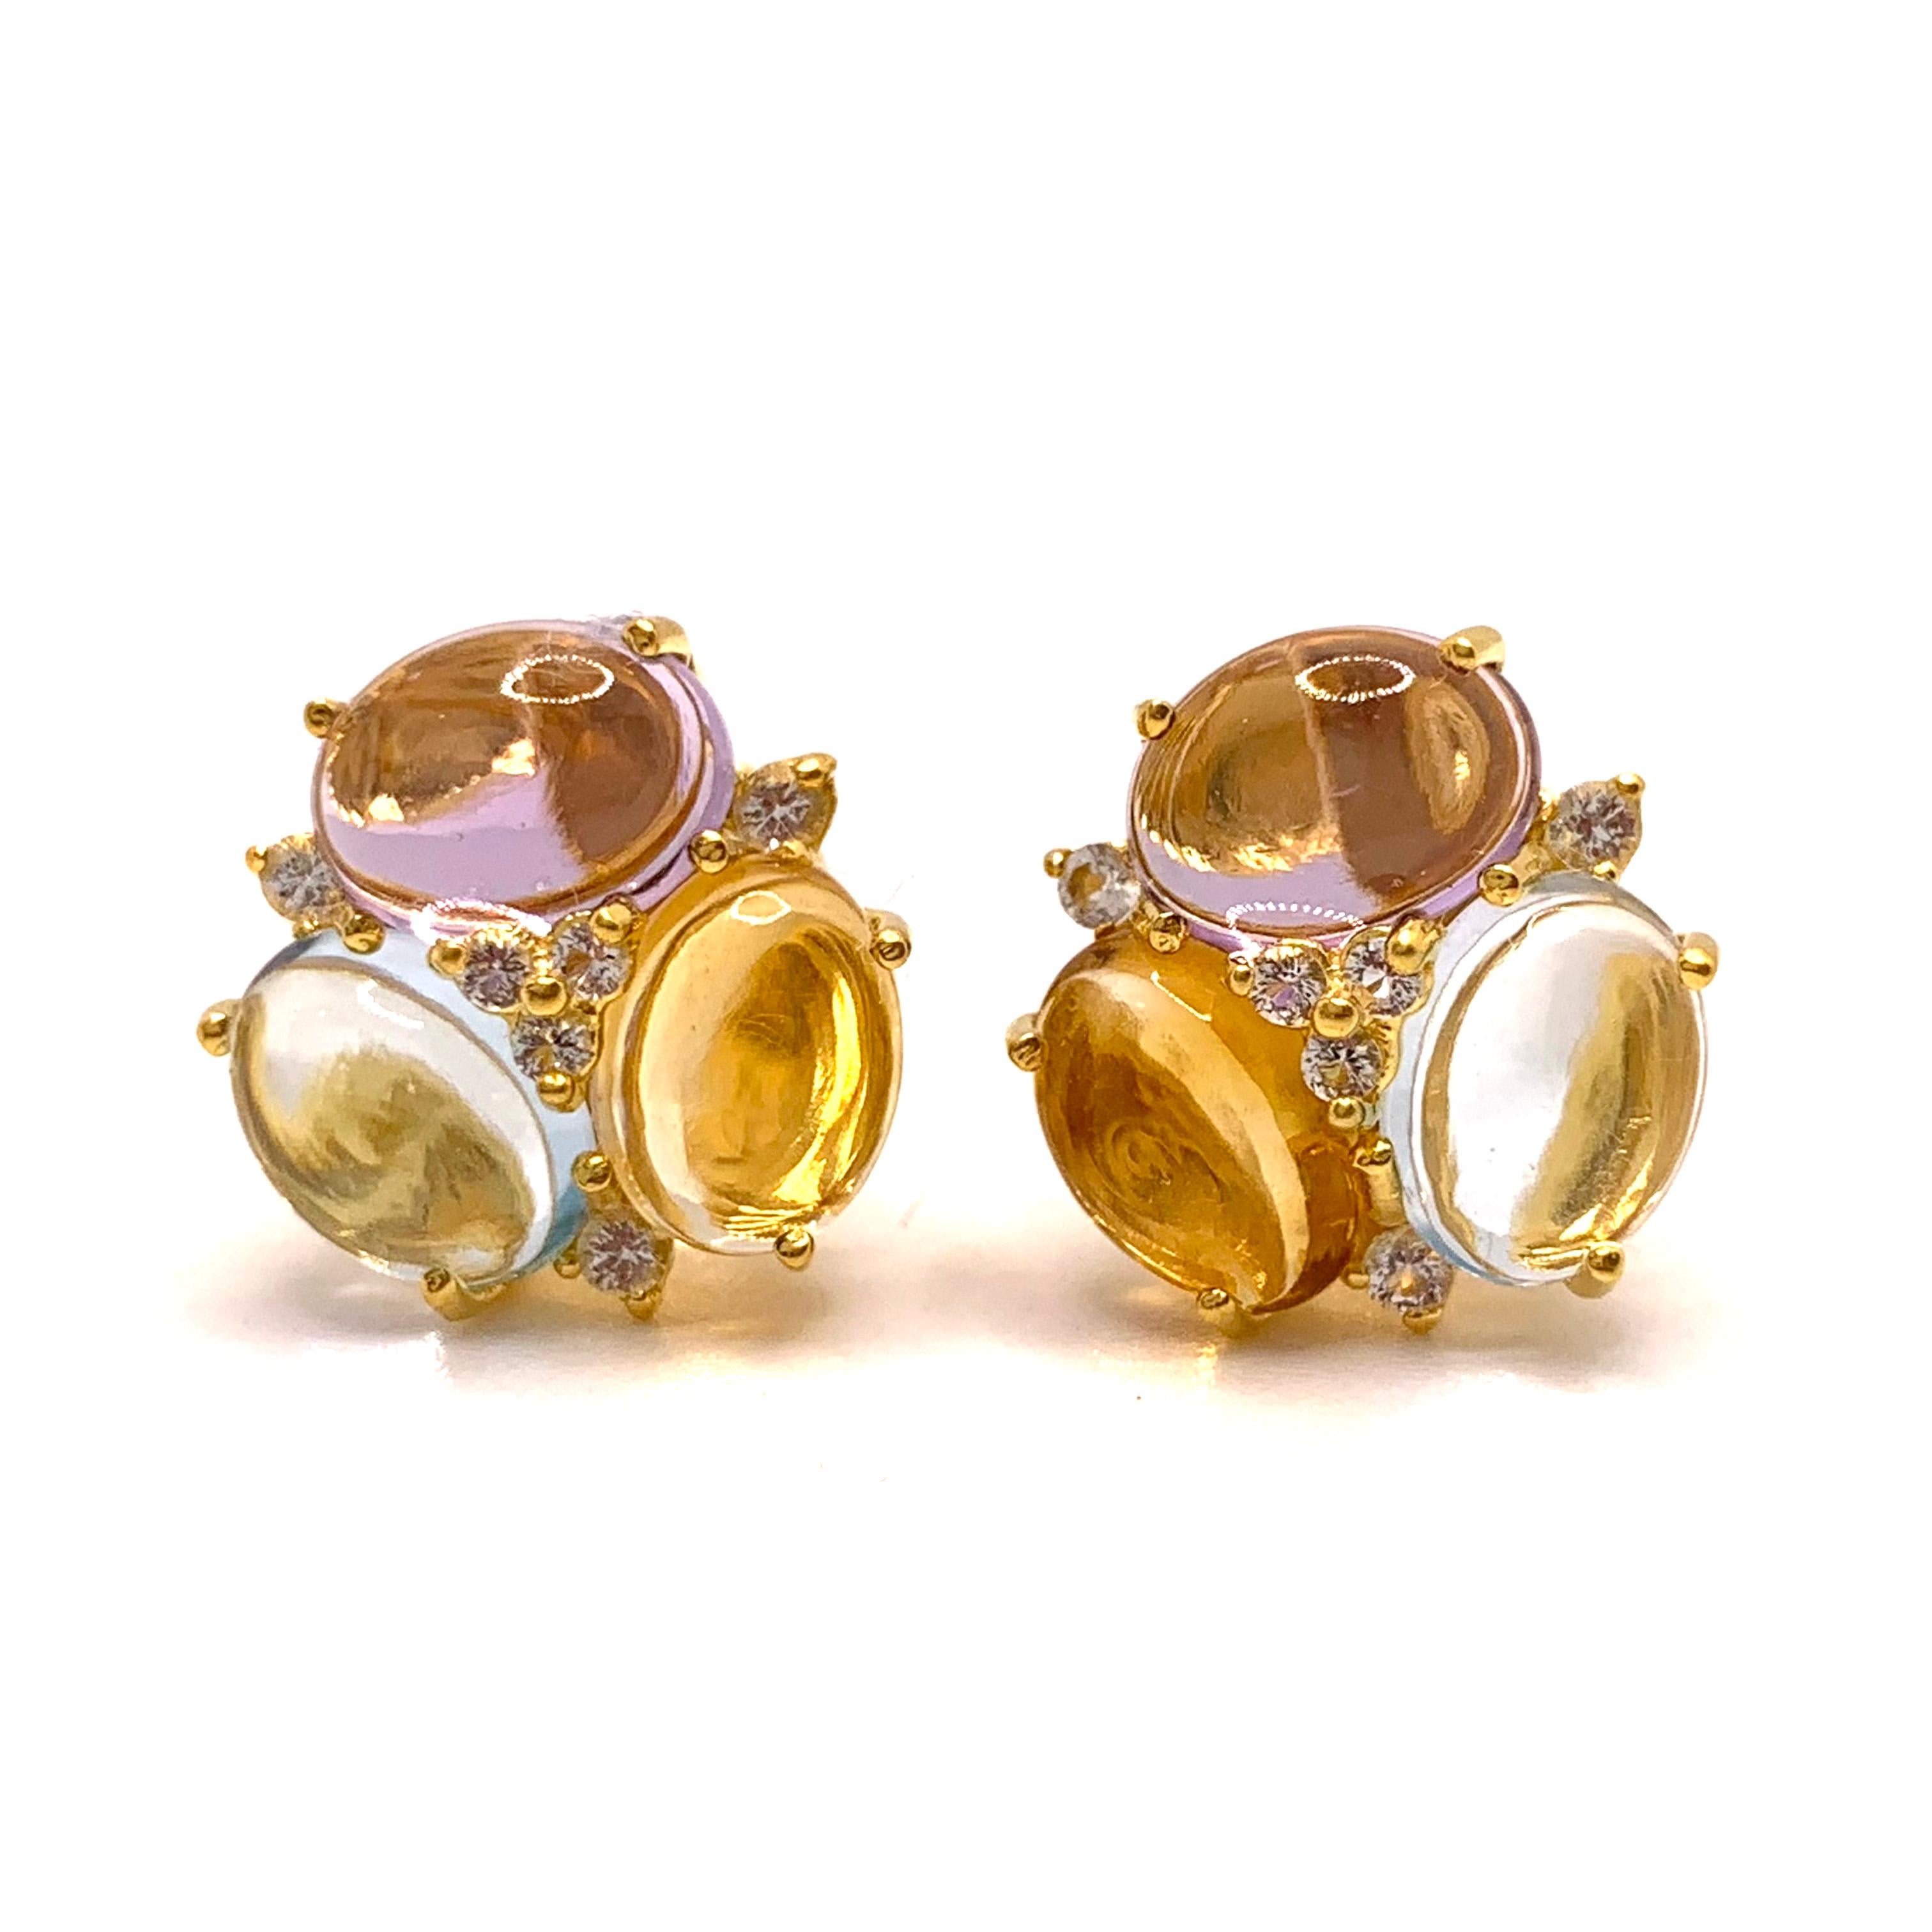 These stunning pair of stud earrings feature sets of oval cabochon-cut amethyst, citrine, and sky blue topaz adorned with white topaz rounds, handset in 18k yellow gold vermeil over sterling silver. The oval stones are very clear (zero inclusion!),